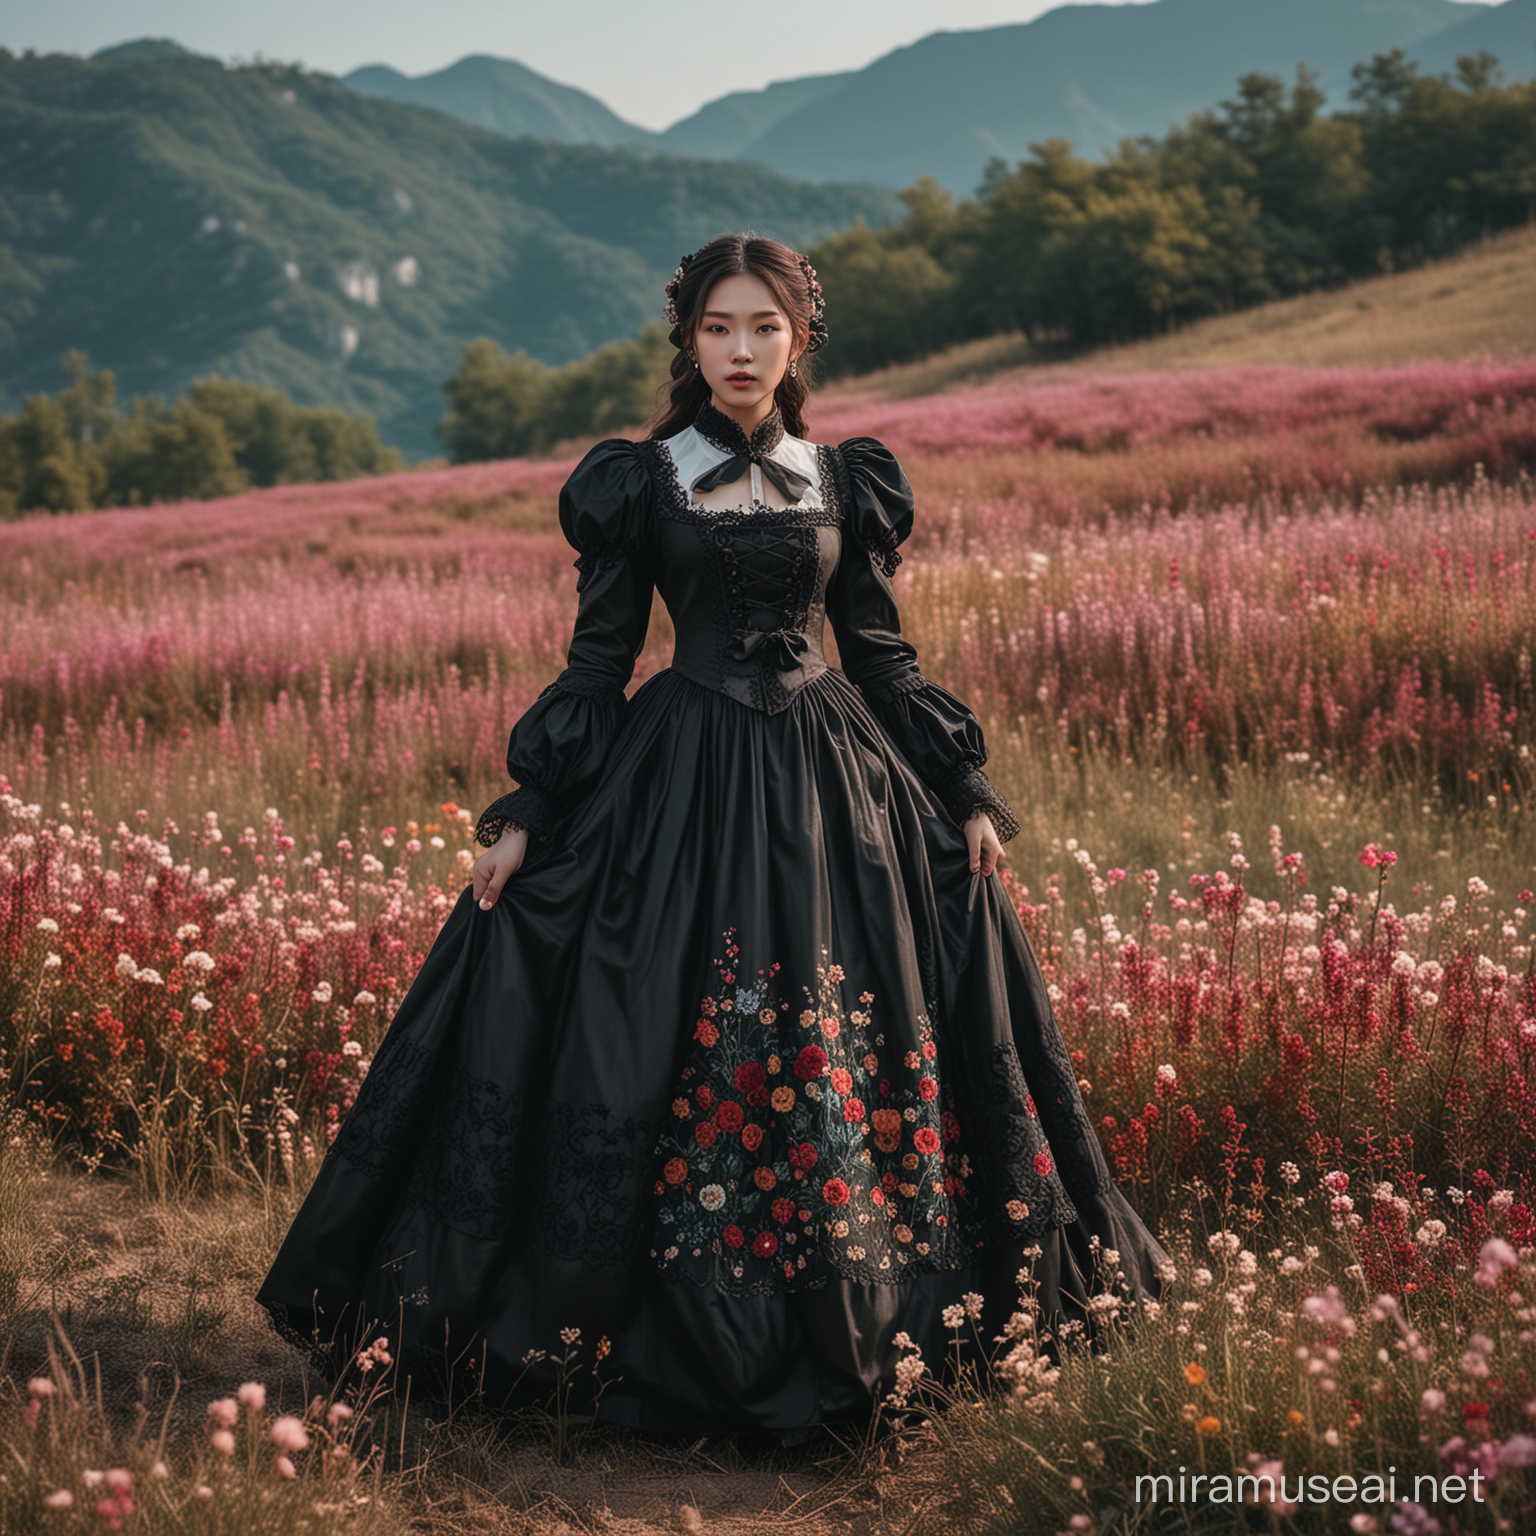 a woman in dress, standing in a mountain top flower field, dark historical baroque dress, gothic lolita dress, historical baroque dress, black victorian dress, gothic dress, gothic lolita fashion, medieval dress., ornate colored fancy dress,, korean hanbok, dress romantic, baroque dresses, rich deep colors gothic